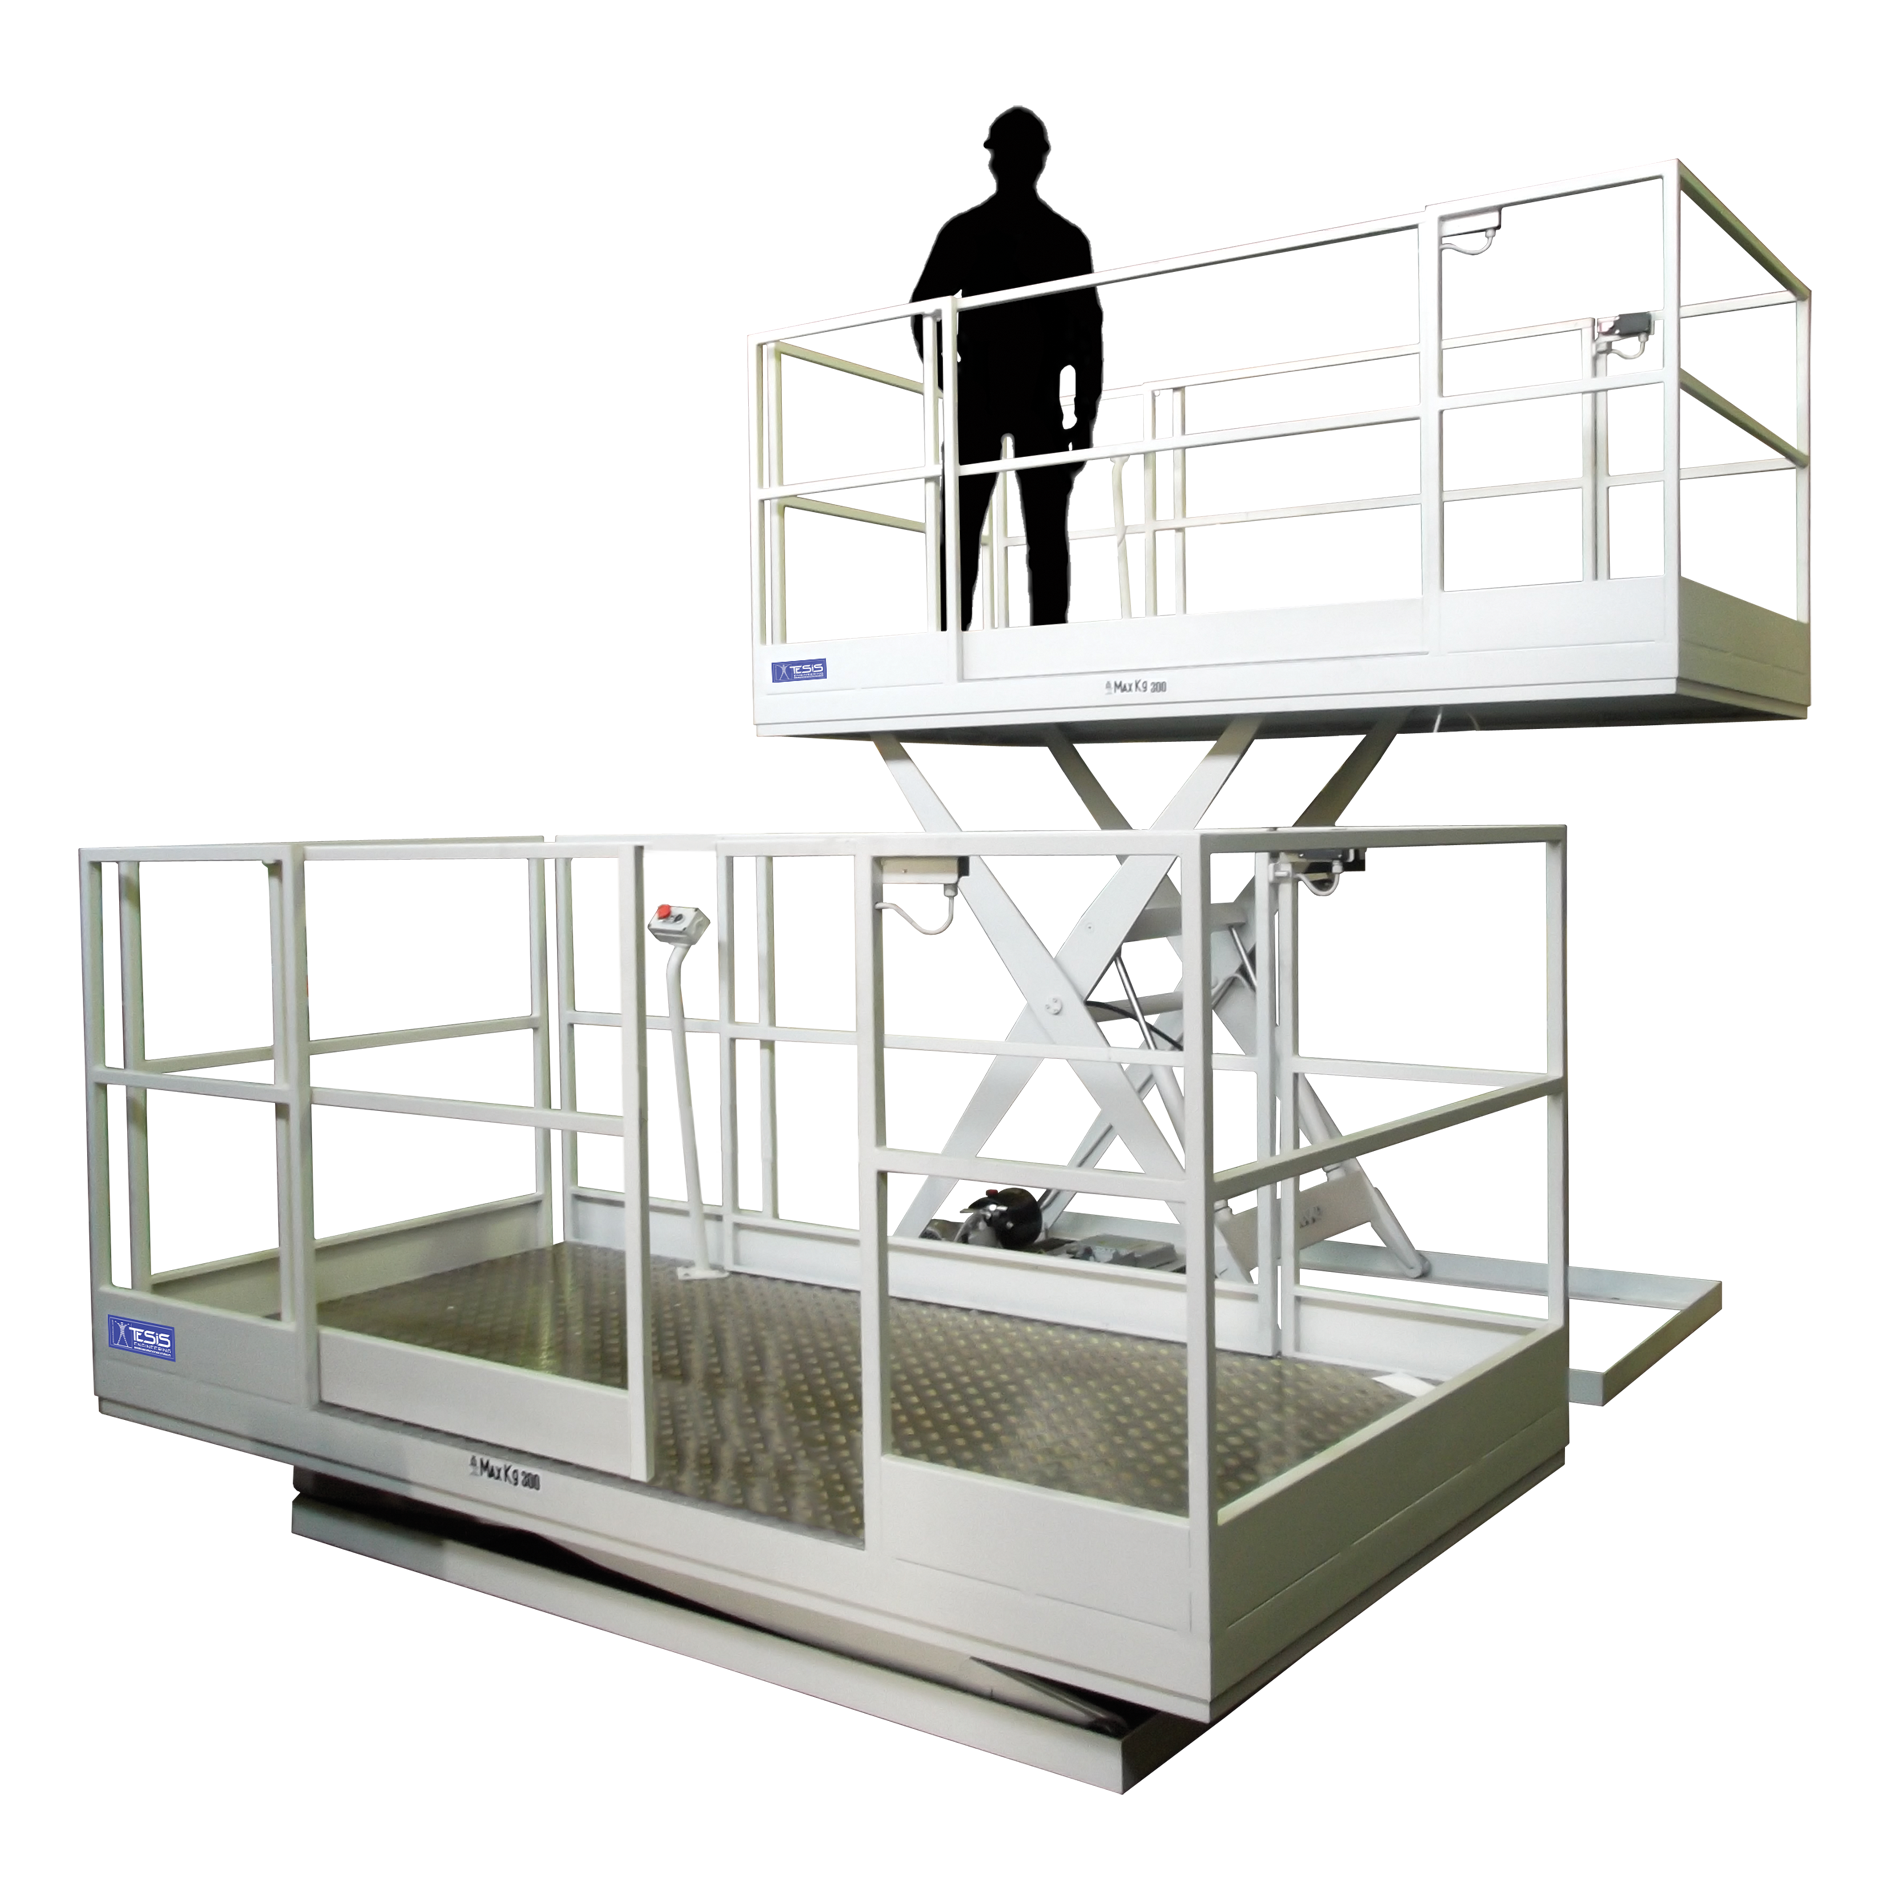 Elevating work platform for fixed workstation with guradrails and slide opening access gate - carousel scissor lifts - worker elevating platforms - worker scissor lifts - carousel lift tables